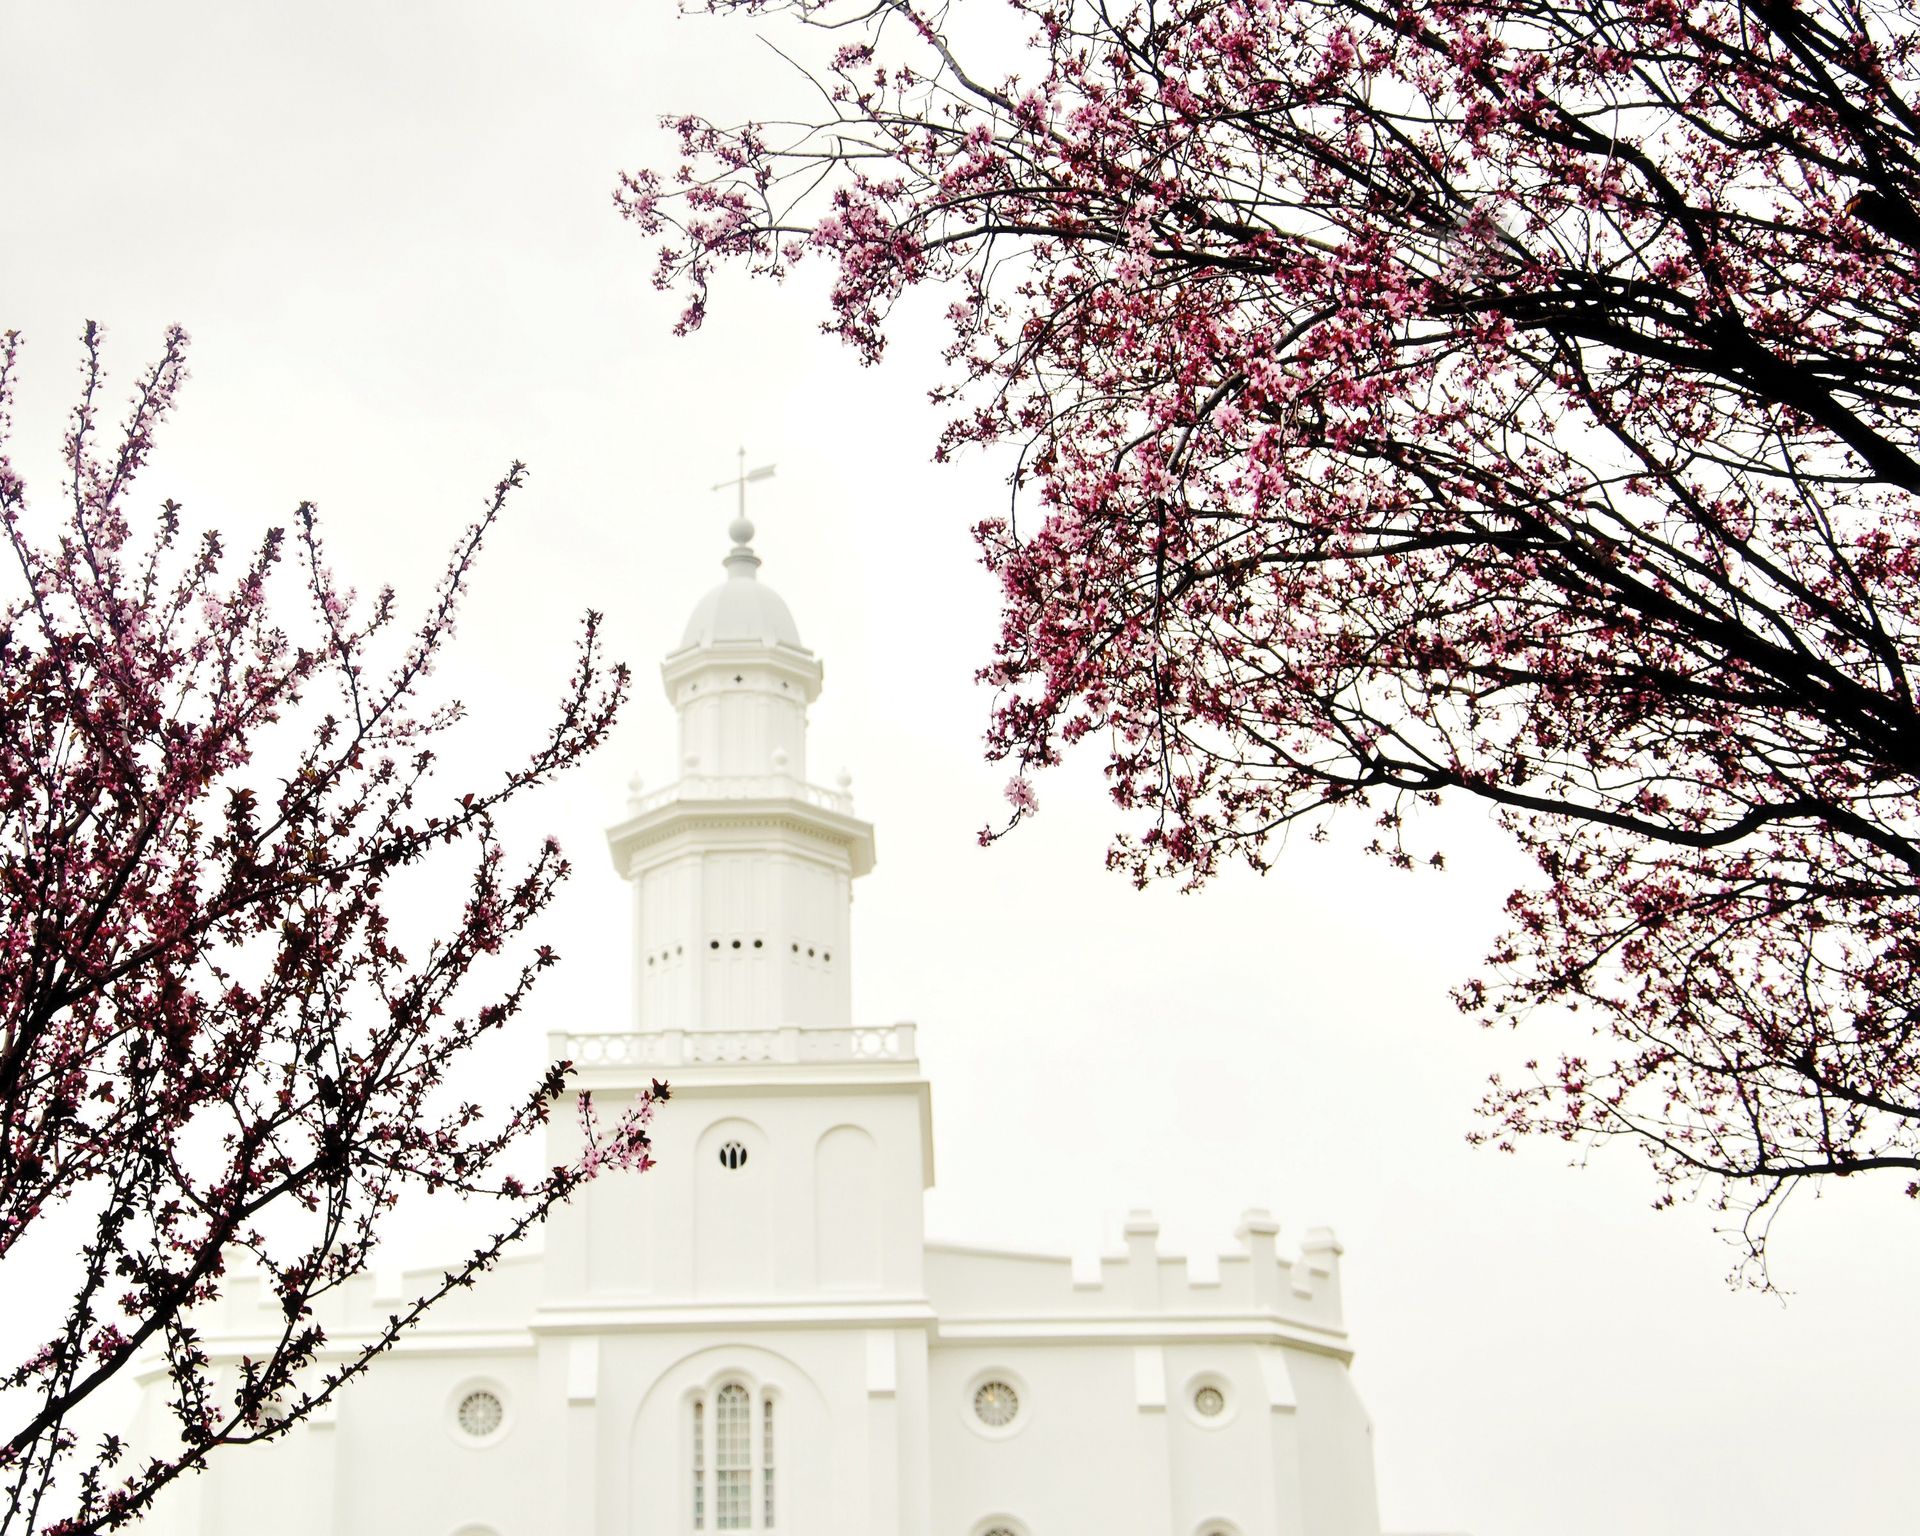 The St. George Utah Temple in the spring, including scenery.